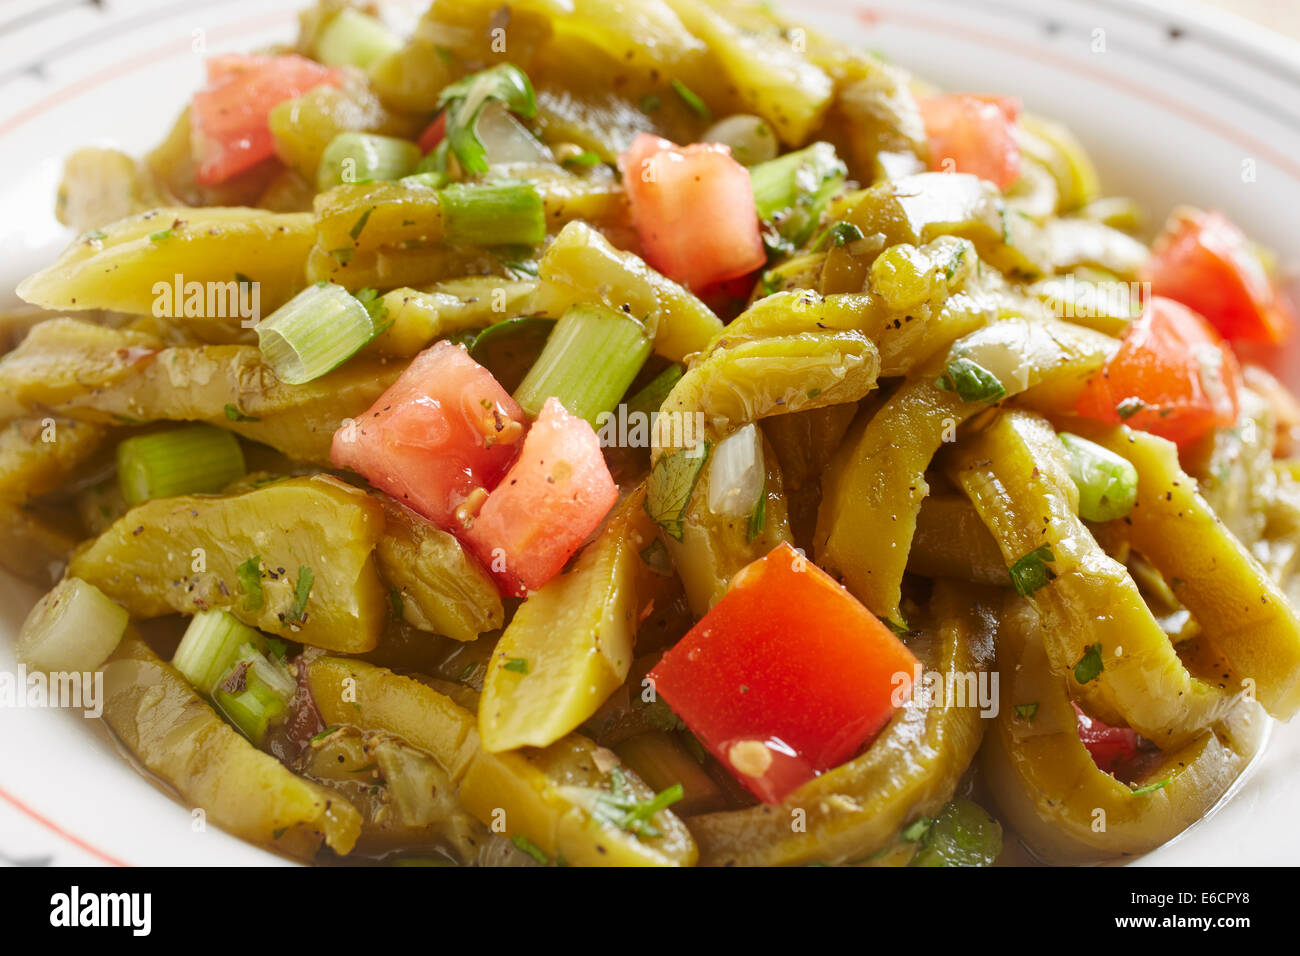 Mexican Cactus Salad with Tomatoes and Scallions Stock Photo